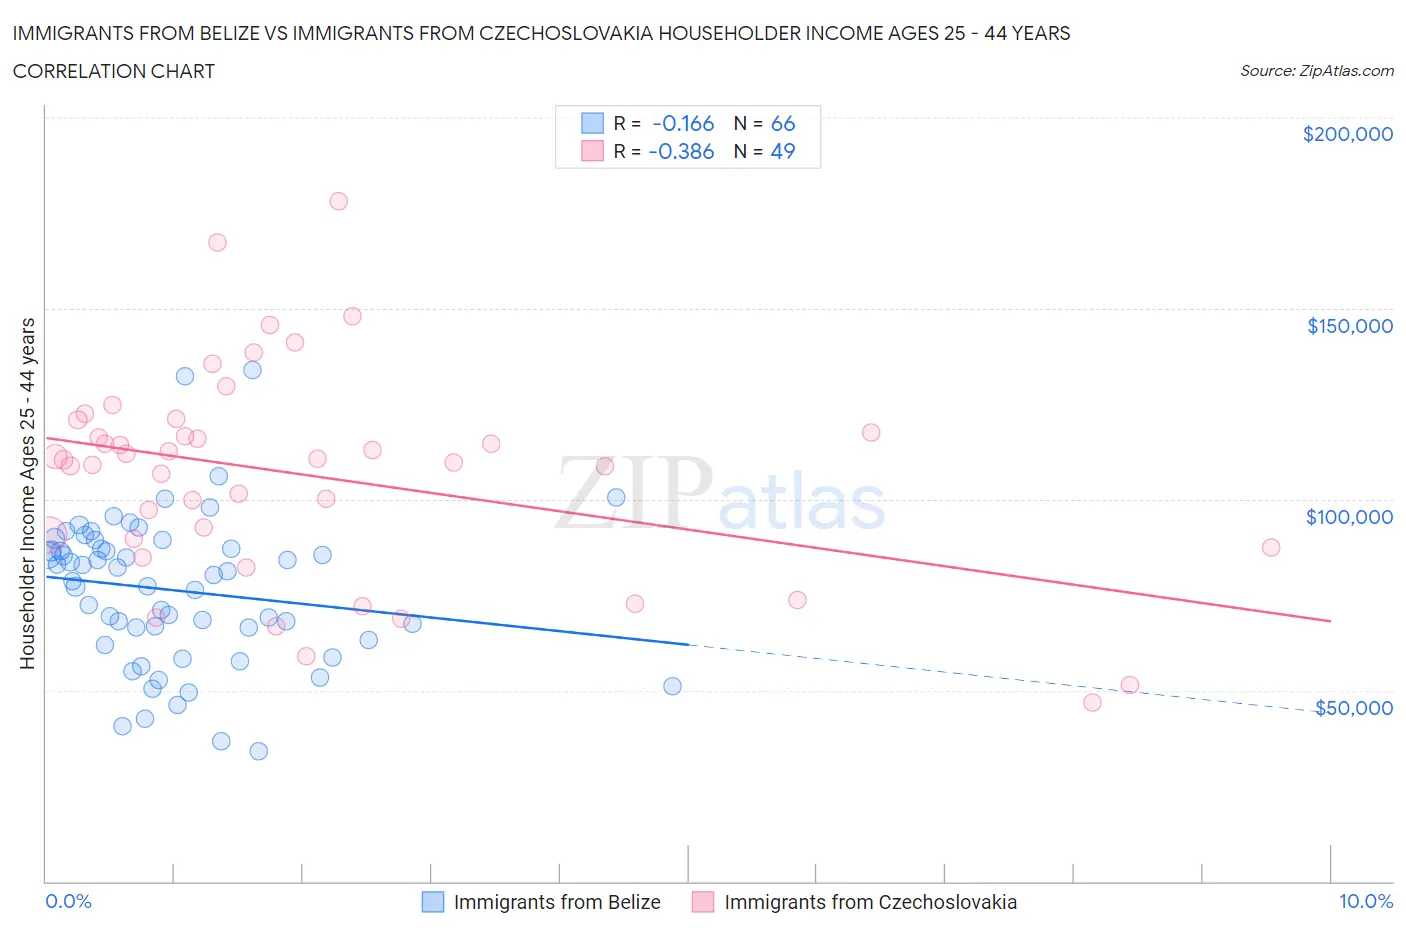 Immigrants from Belize vs Immigrants from Czechoslovakia Householder Income Ages 25 - 44 years